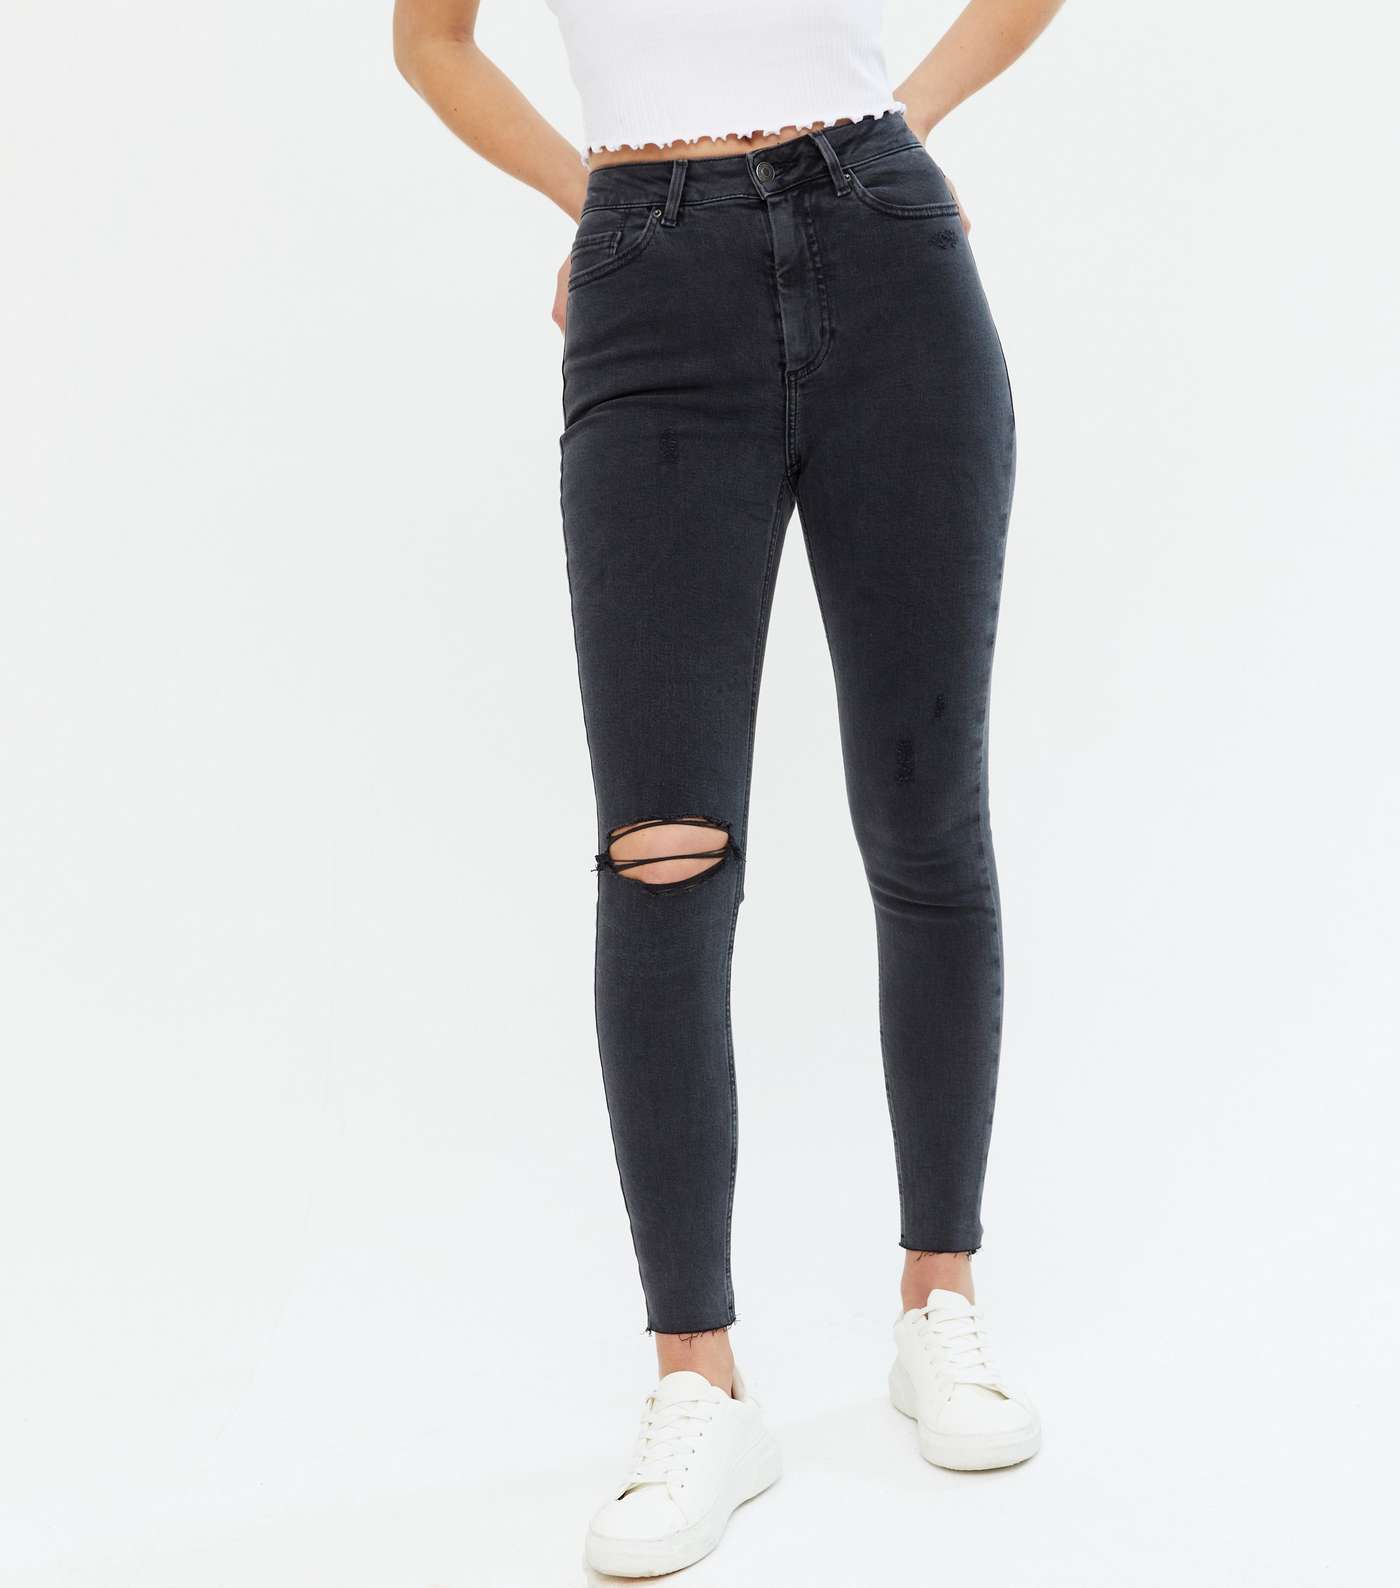 Black Ripped High Rise Ashleigh Skinny Jeans Image 2